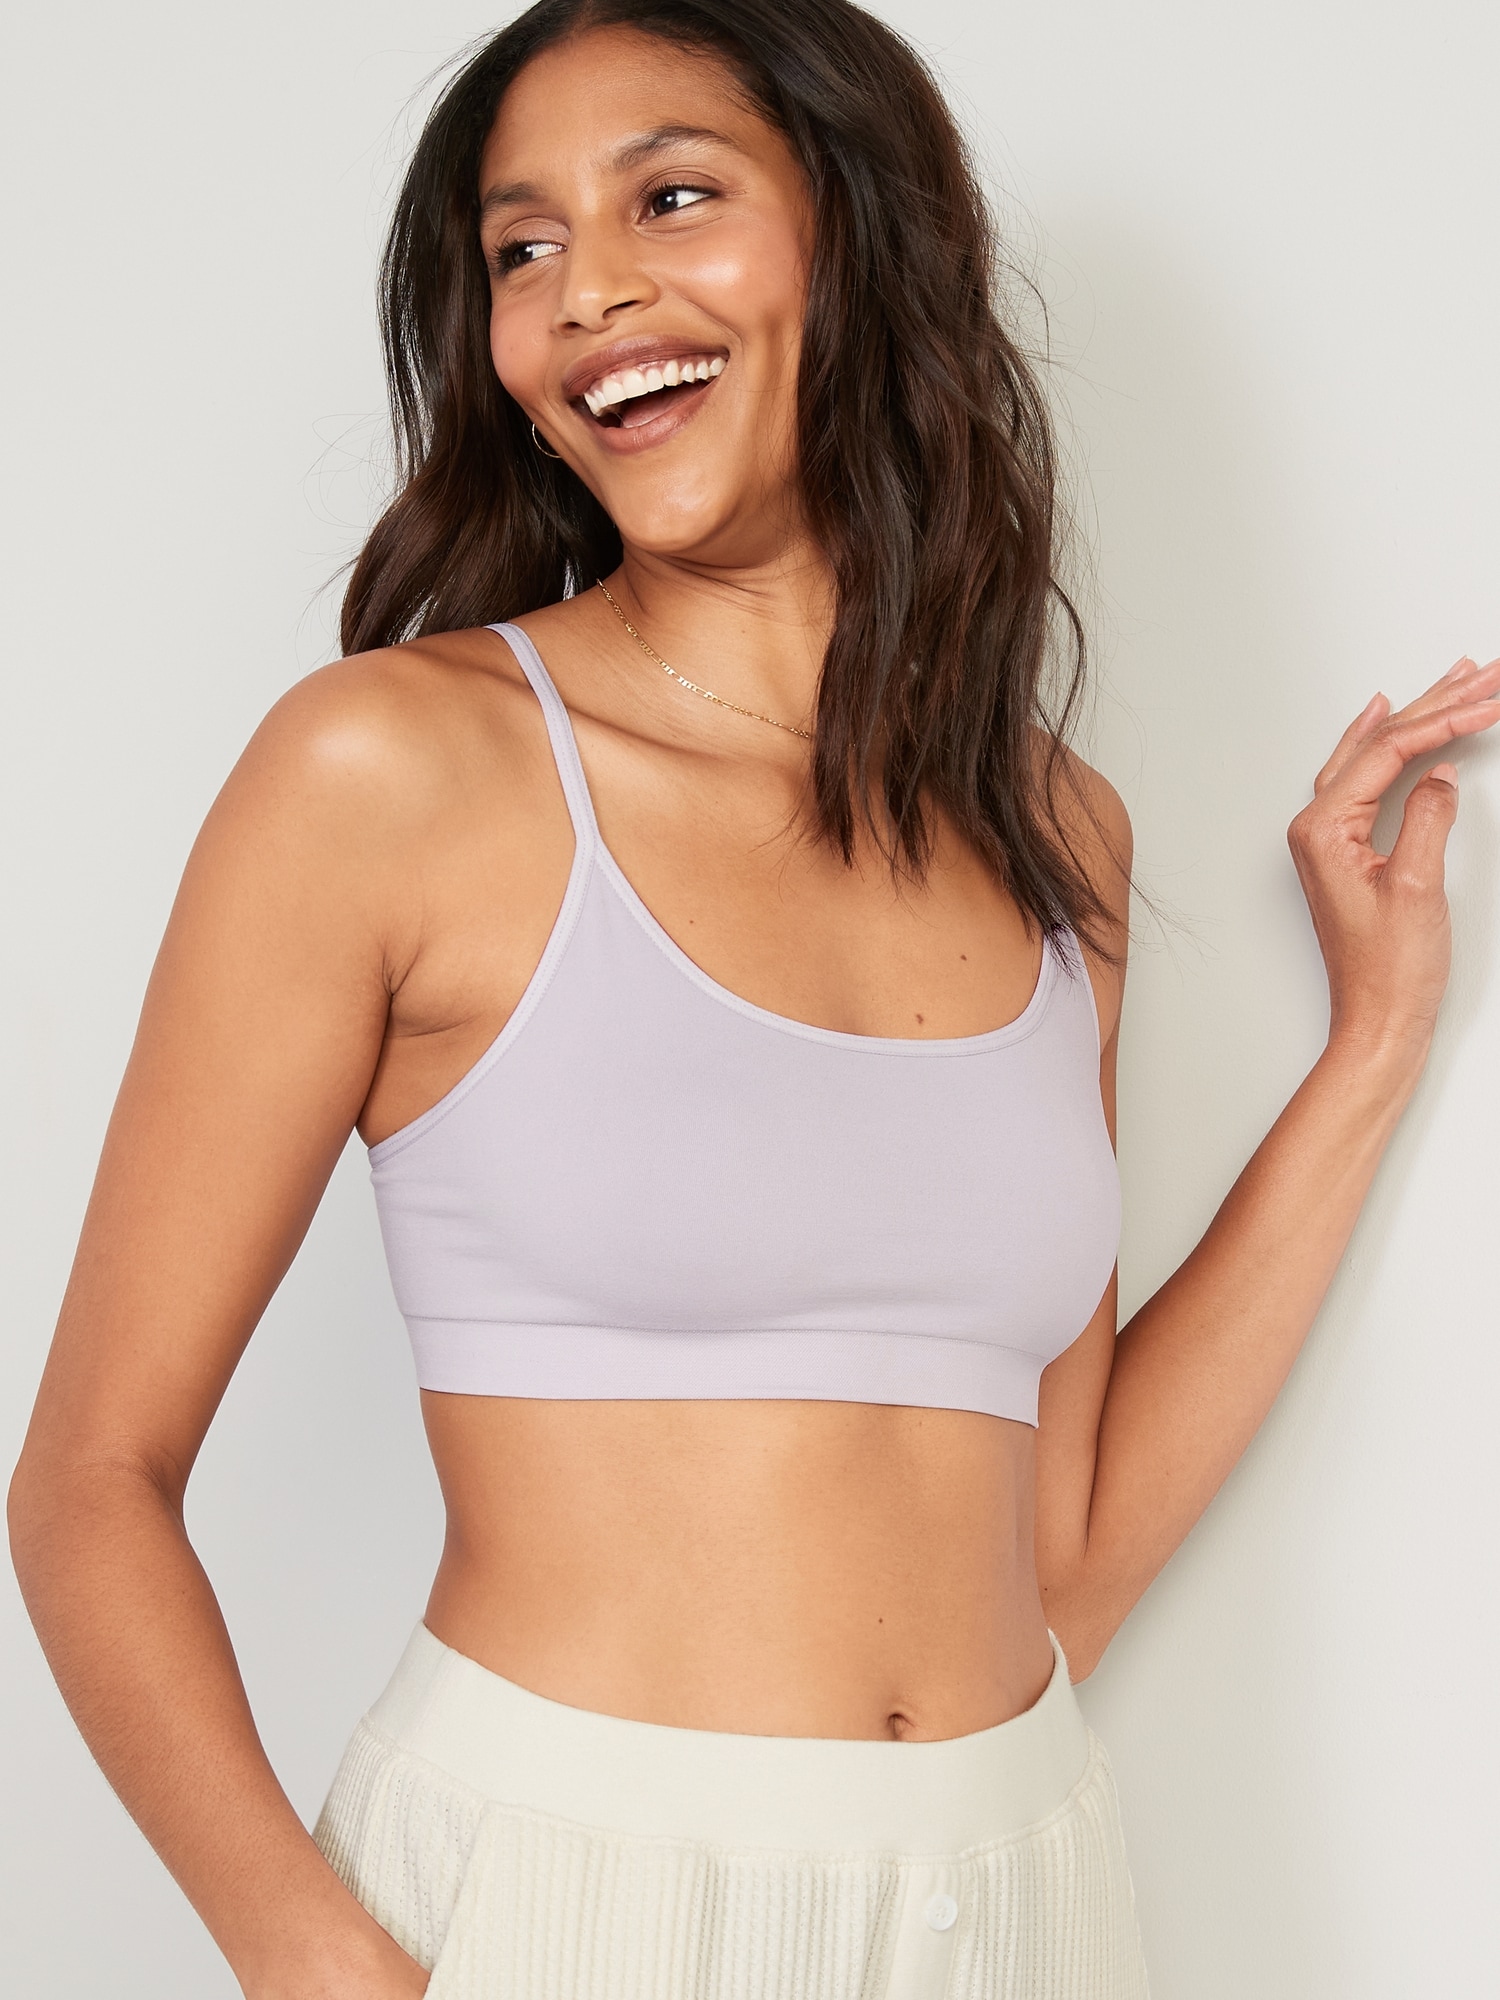 Lands' End Women's Seamless Cami With Built In Bra - 1x - Egret